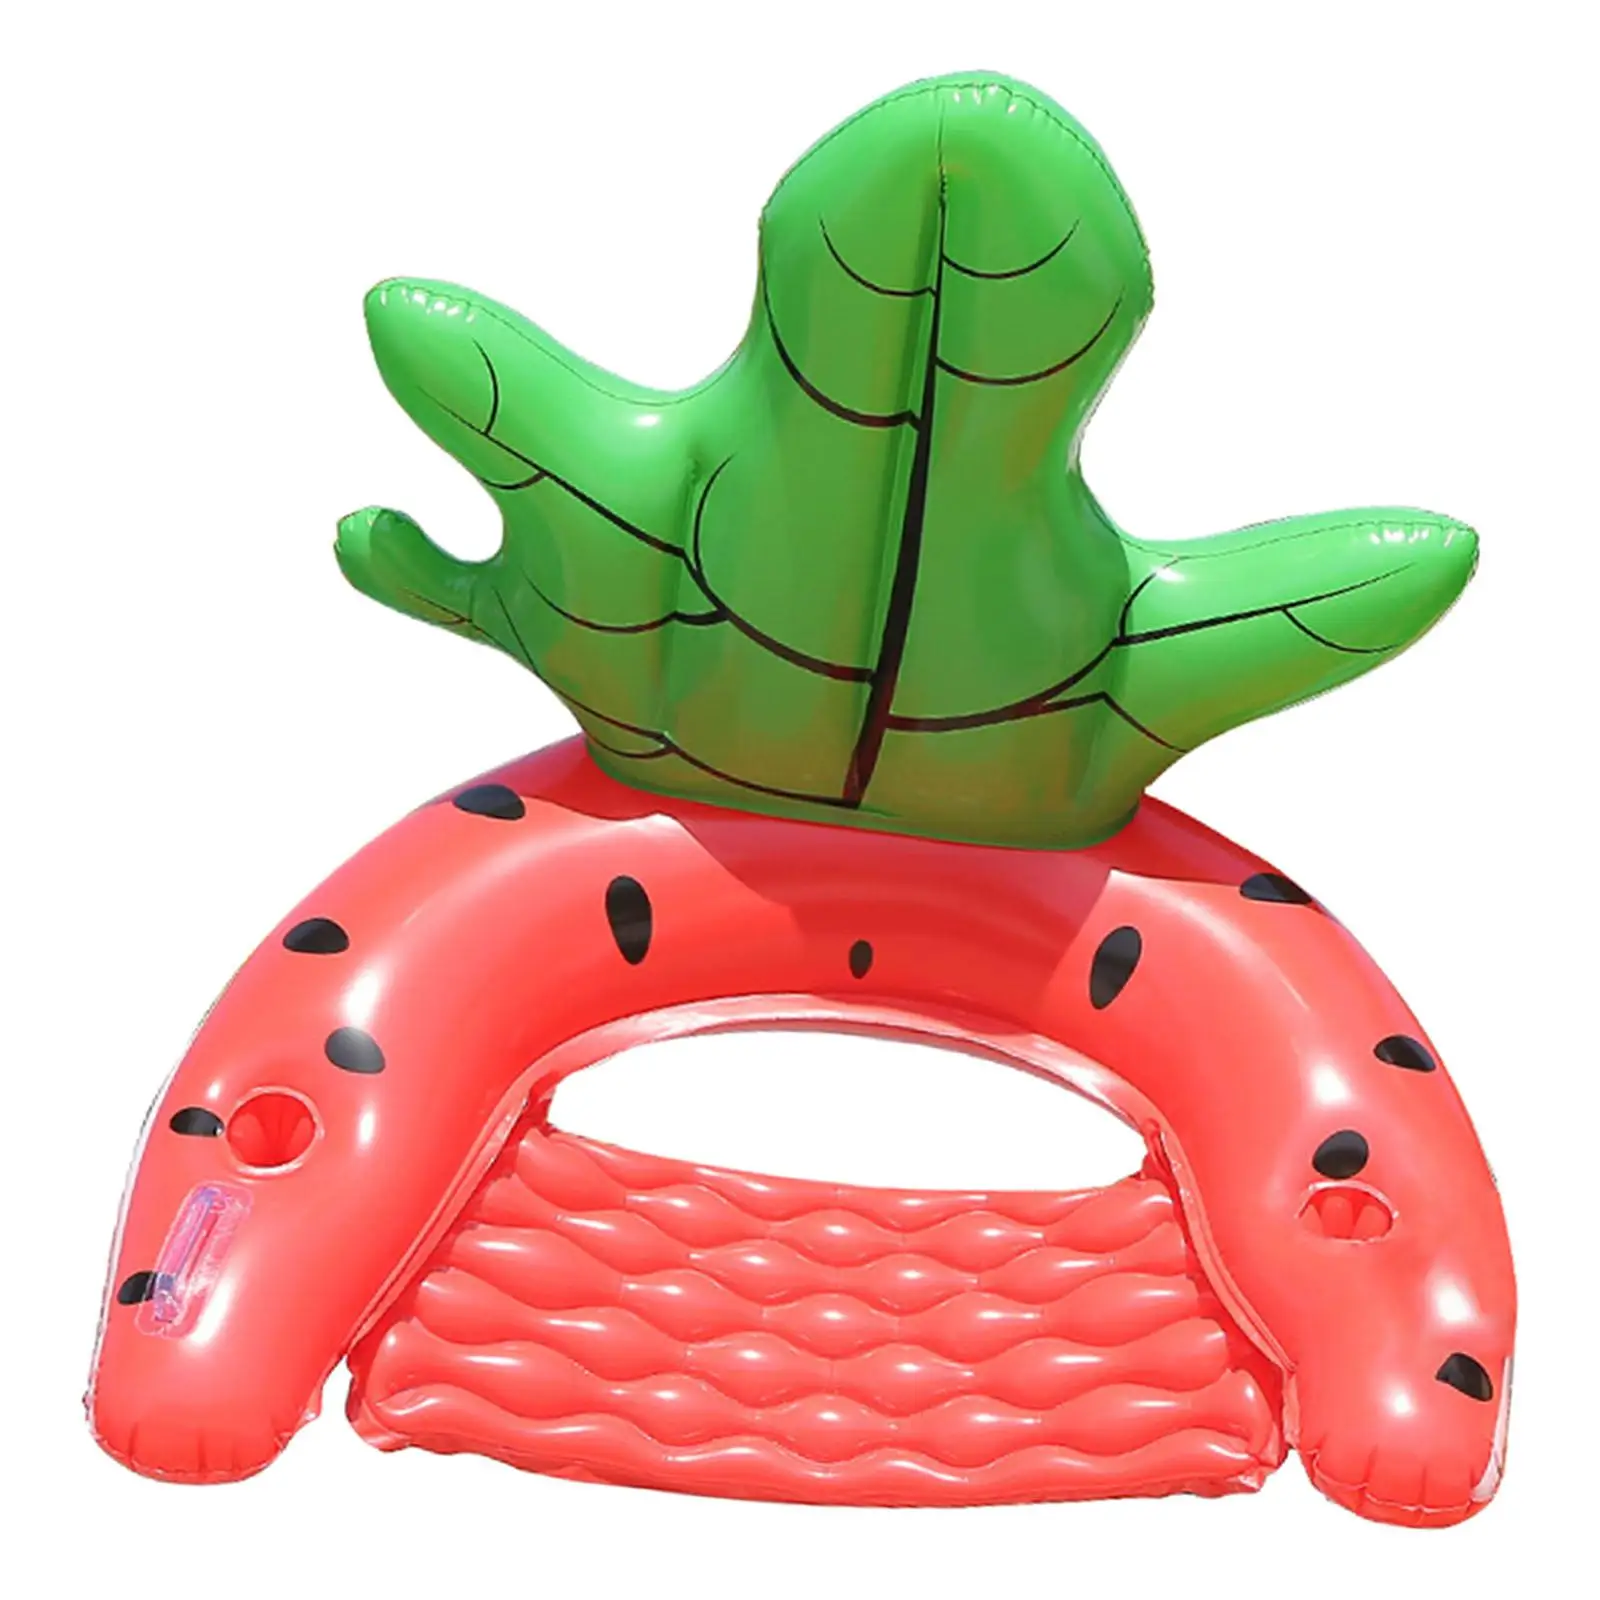 Watermelon Inflatable Pool Float Water Hammock Float Inflatable Pool Lounge Chair Float with Handles for Outdoor Pool Party